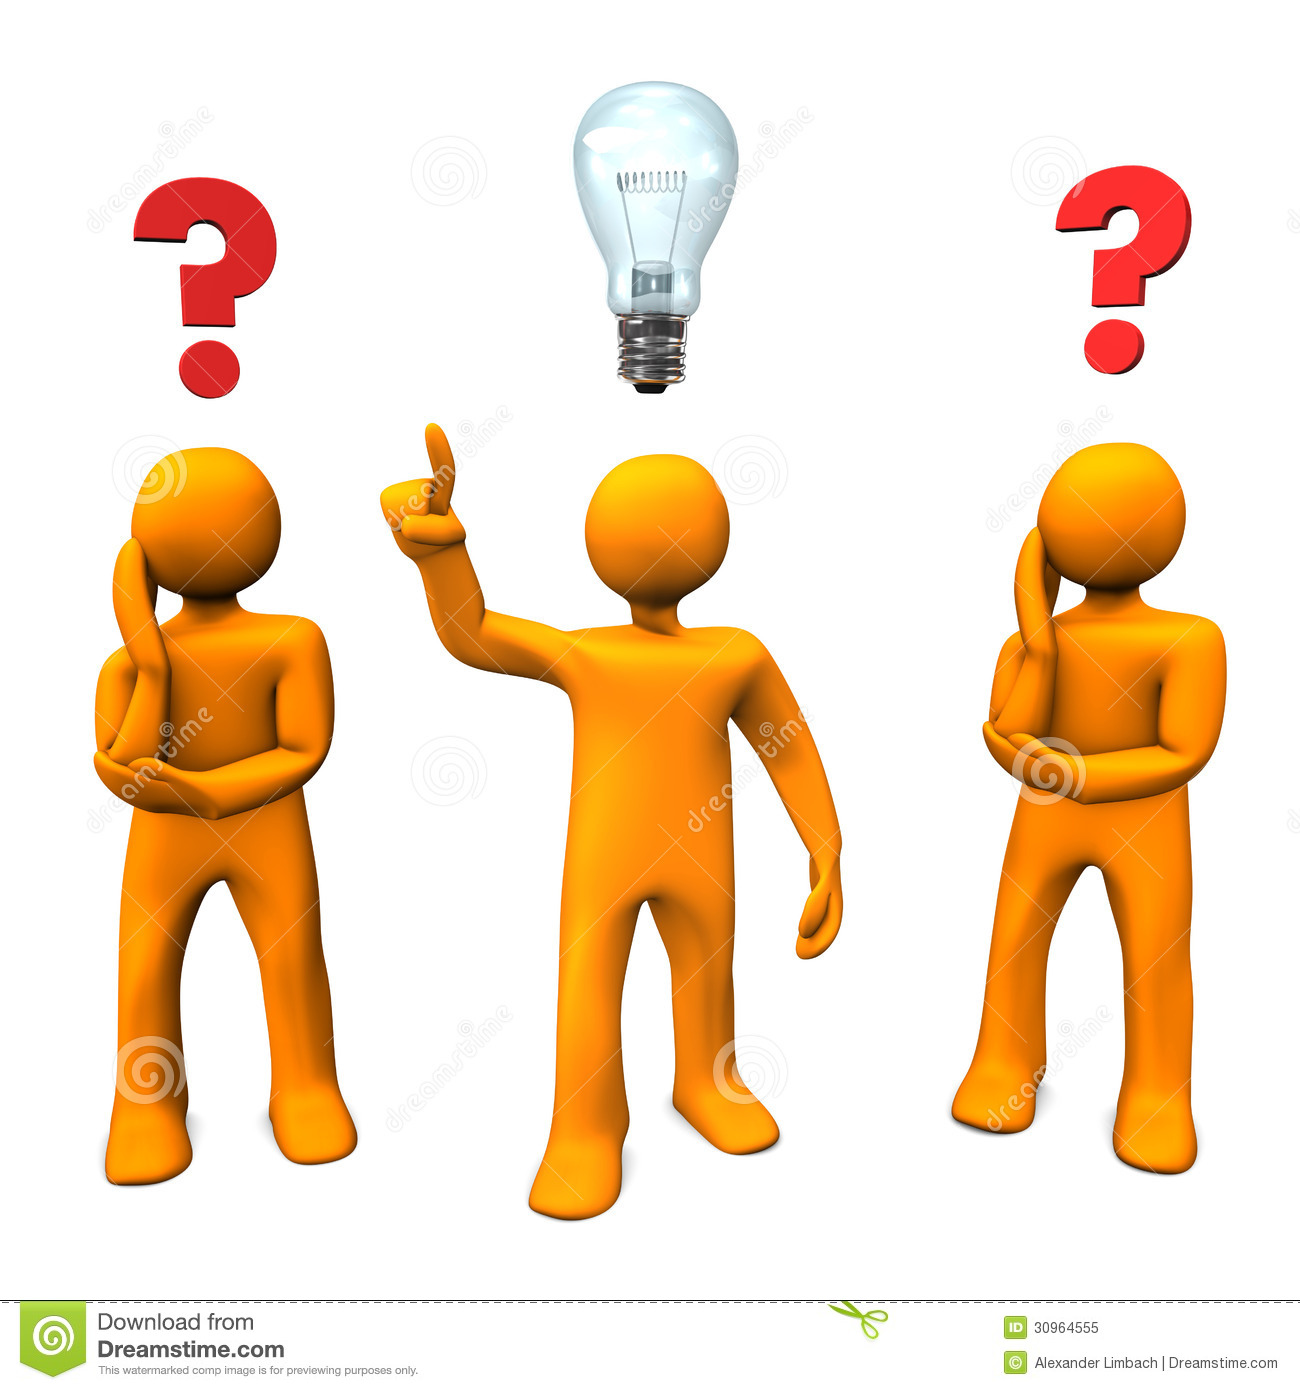 Manikins Questions Idea Royalty Free Stock Photo   Image  30964555